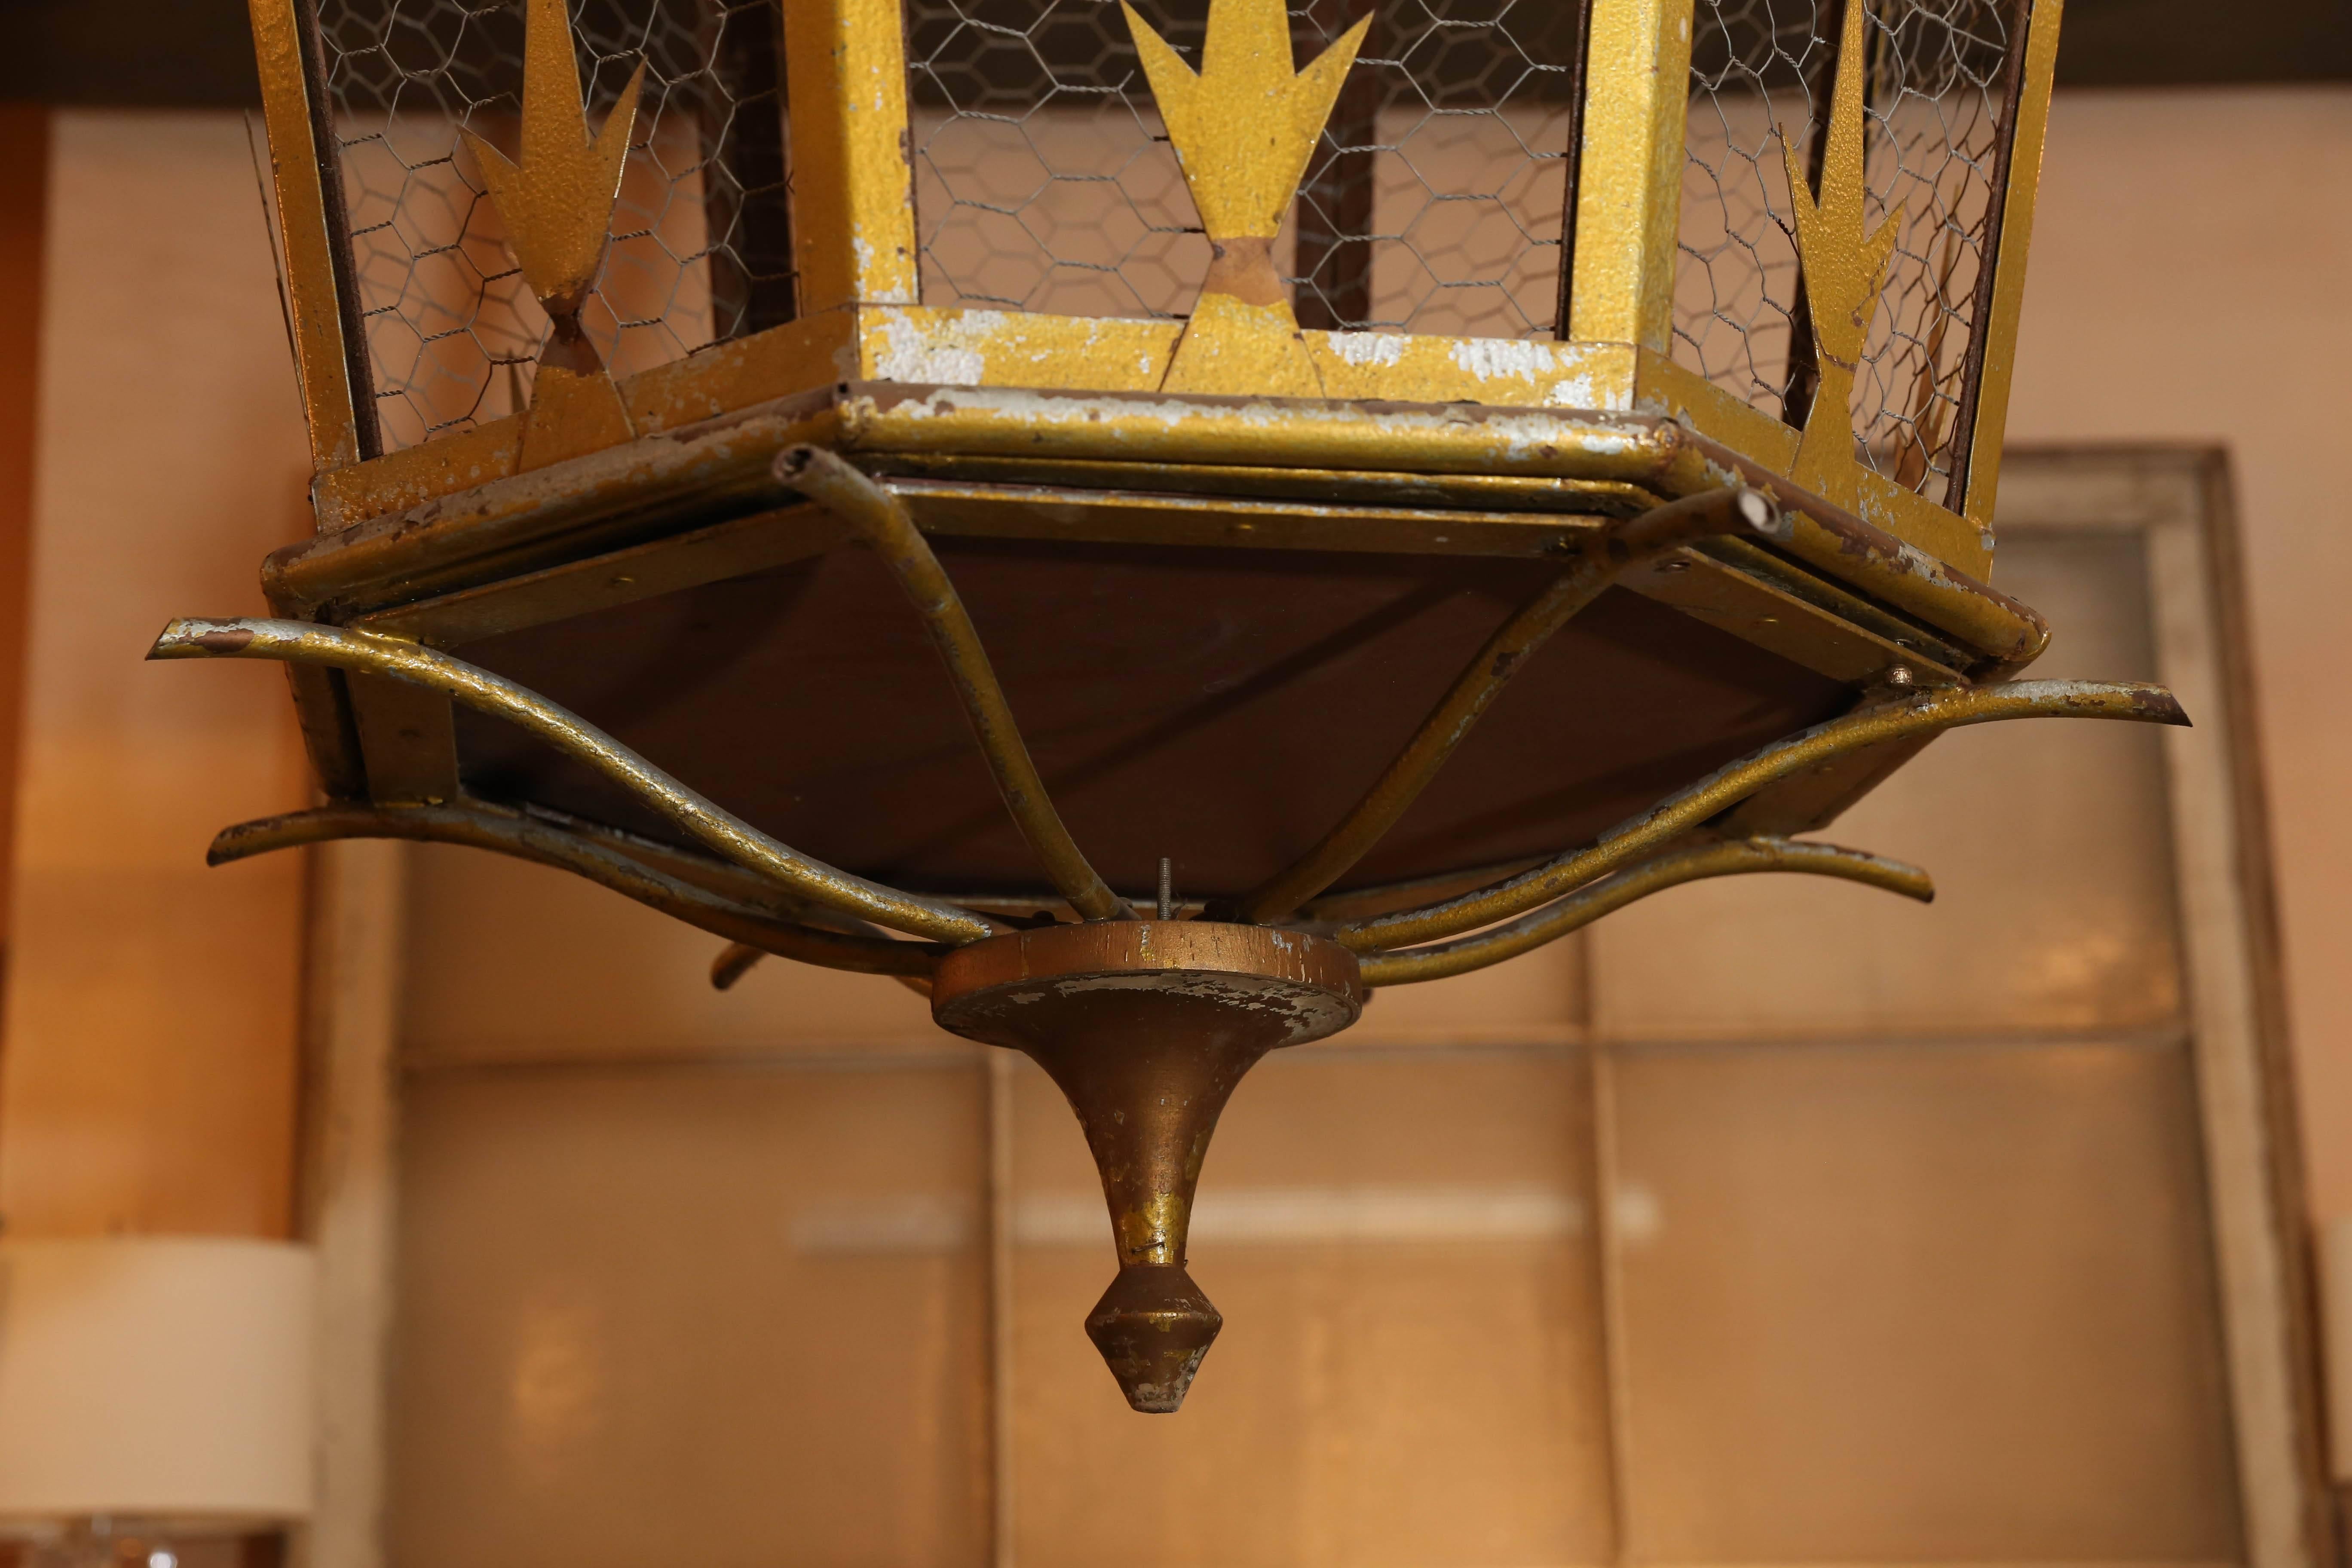 Large octagonal gold-painted lantern from Italy with chicken wire panels. This lantern can be electrified, or fitted as a gas lantern, for an additional fee.